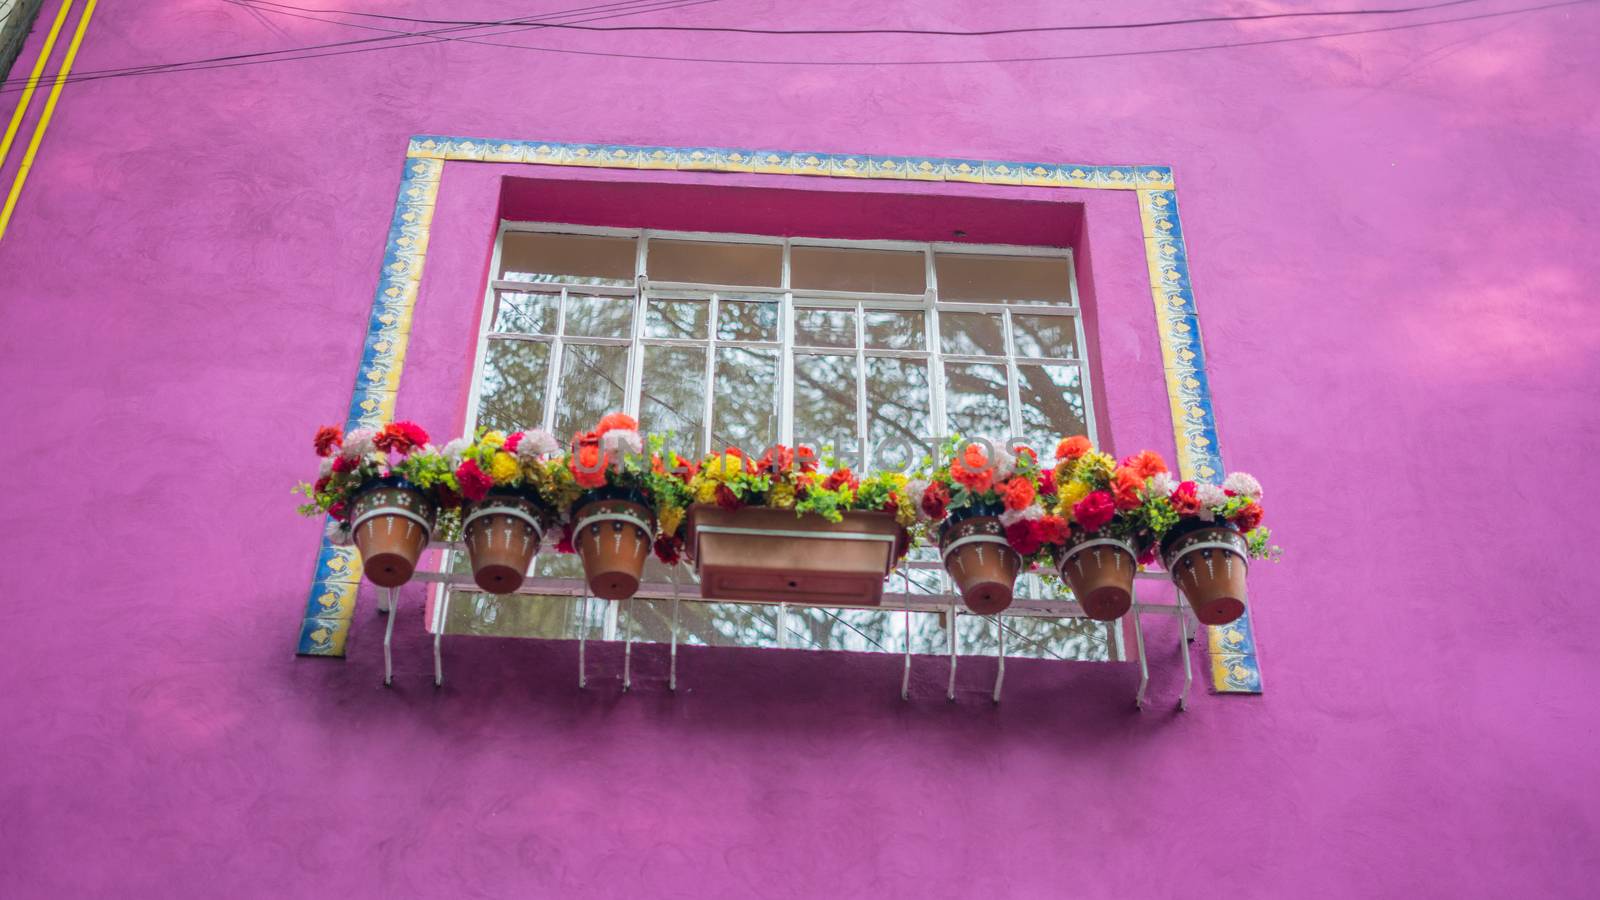 Picture of a window from a pink house with colorful flowers outside